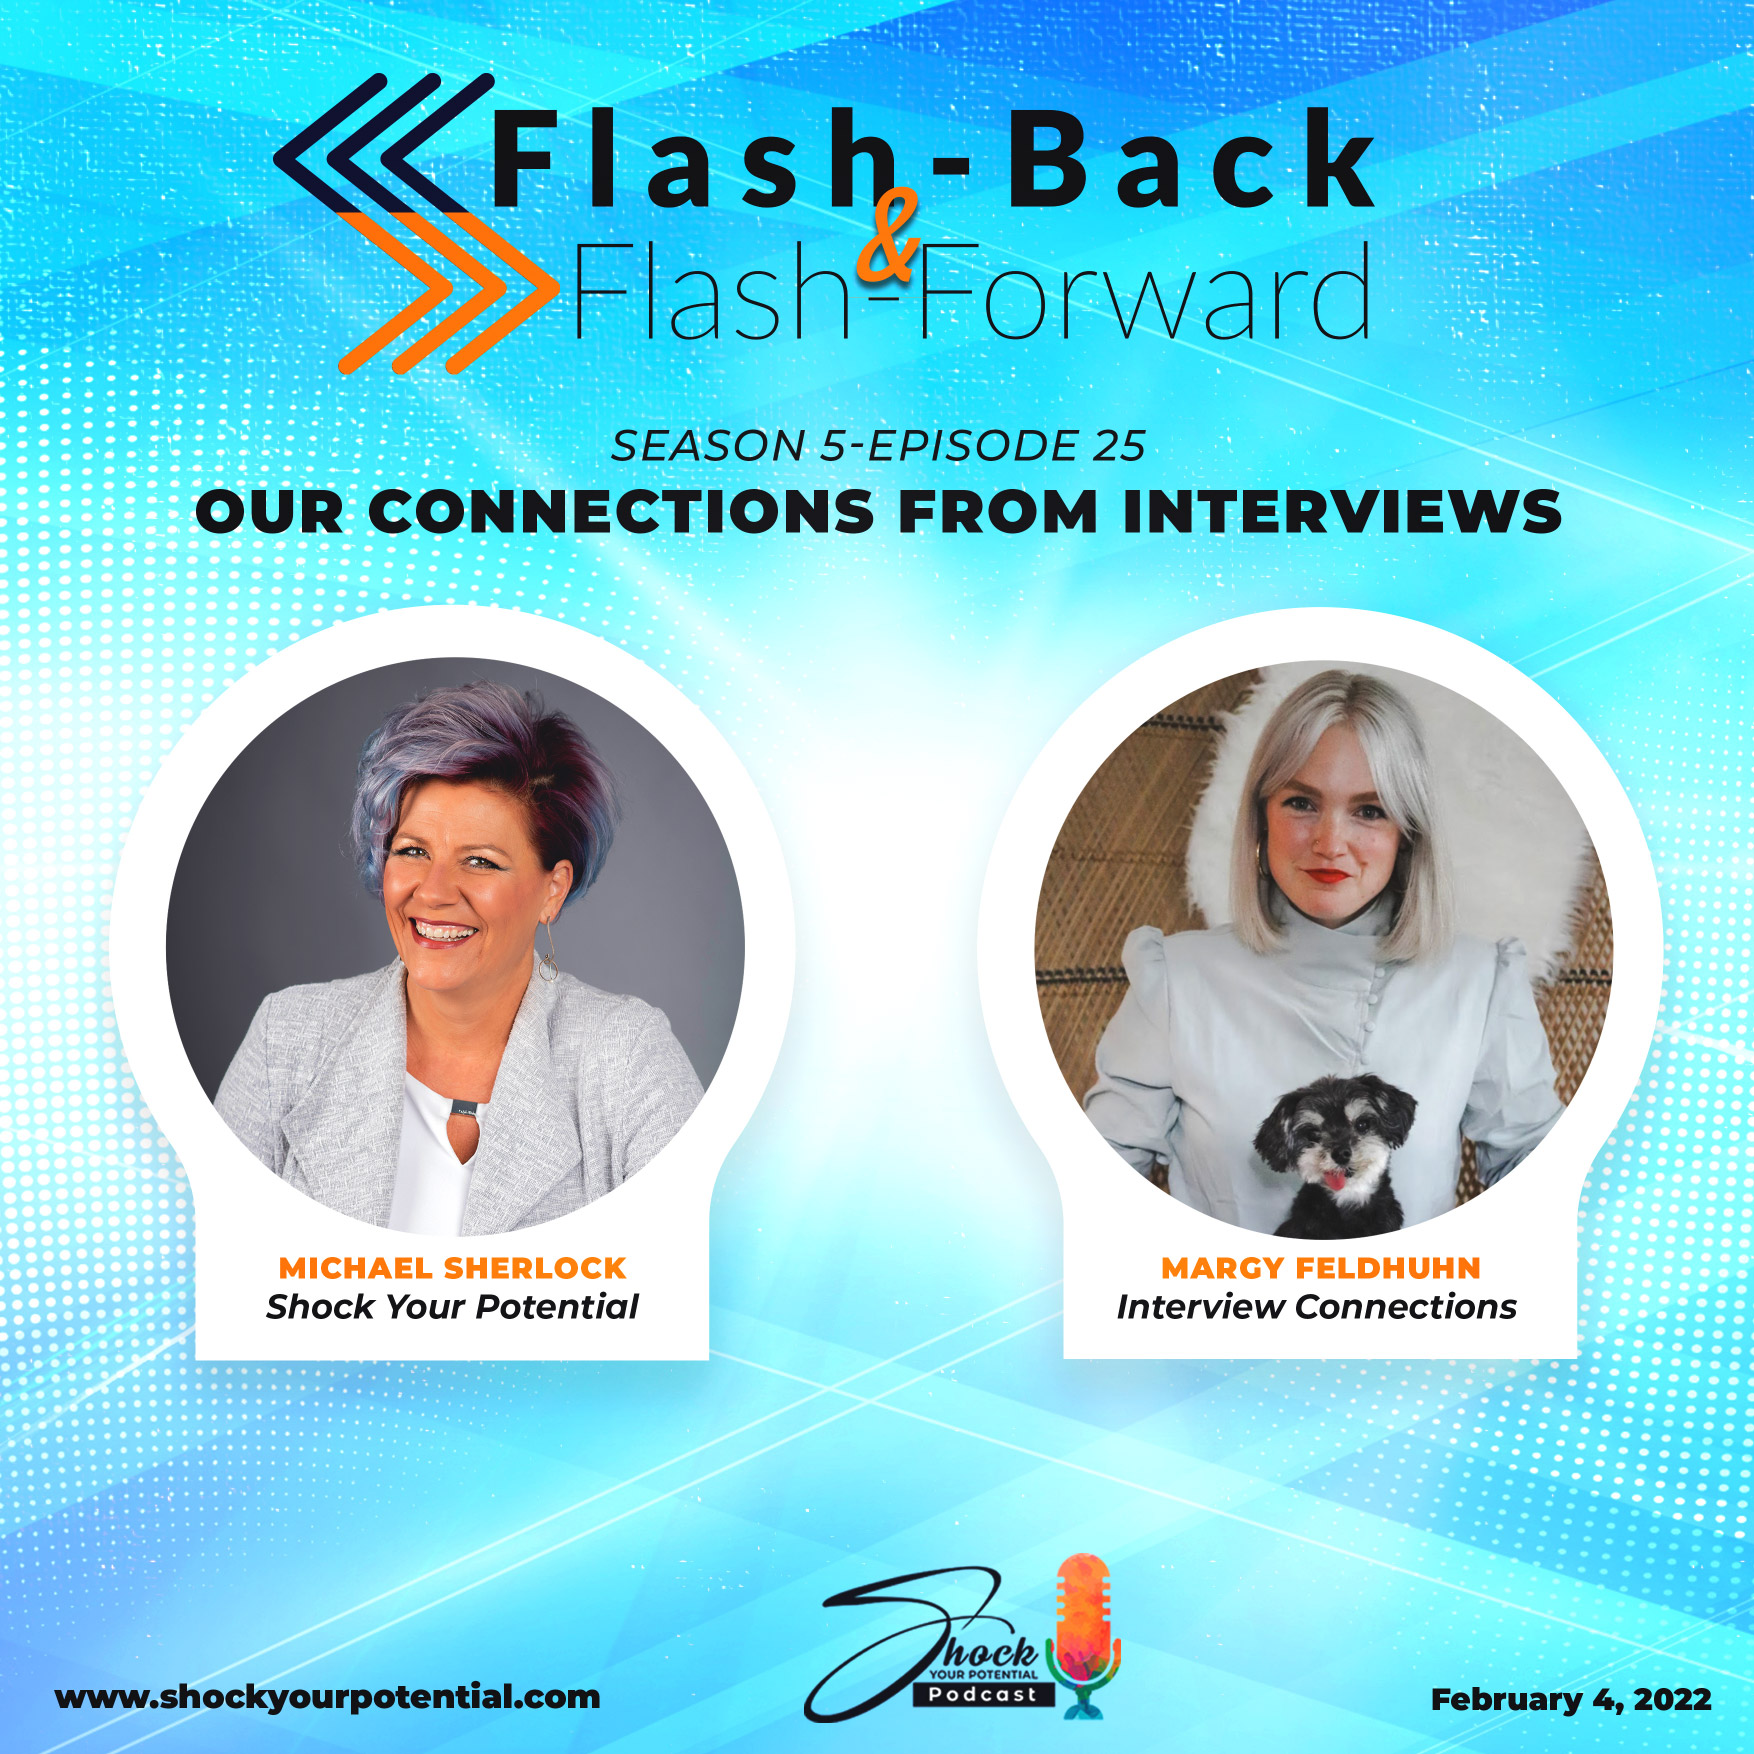 Our Connections From Interviews – Margy Feldhuhn